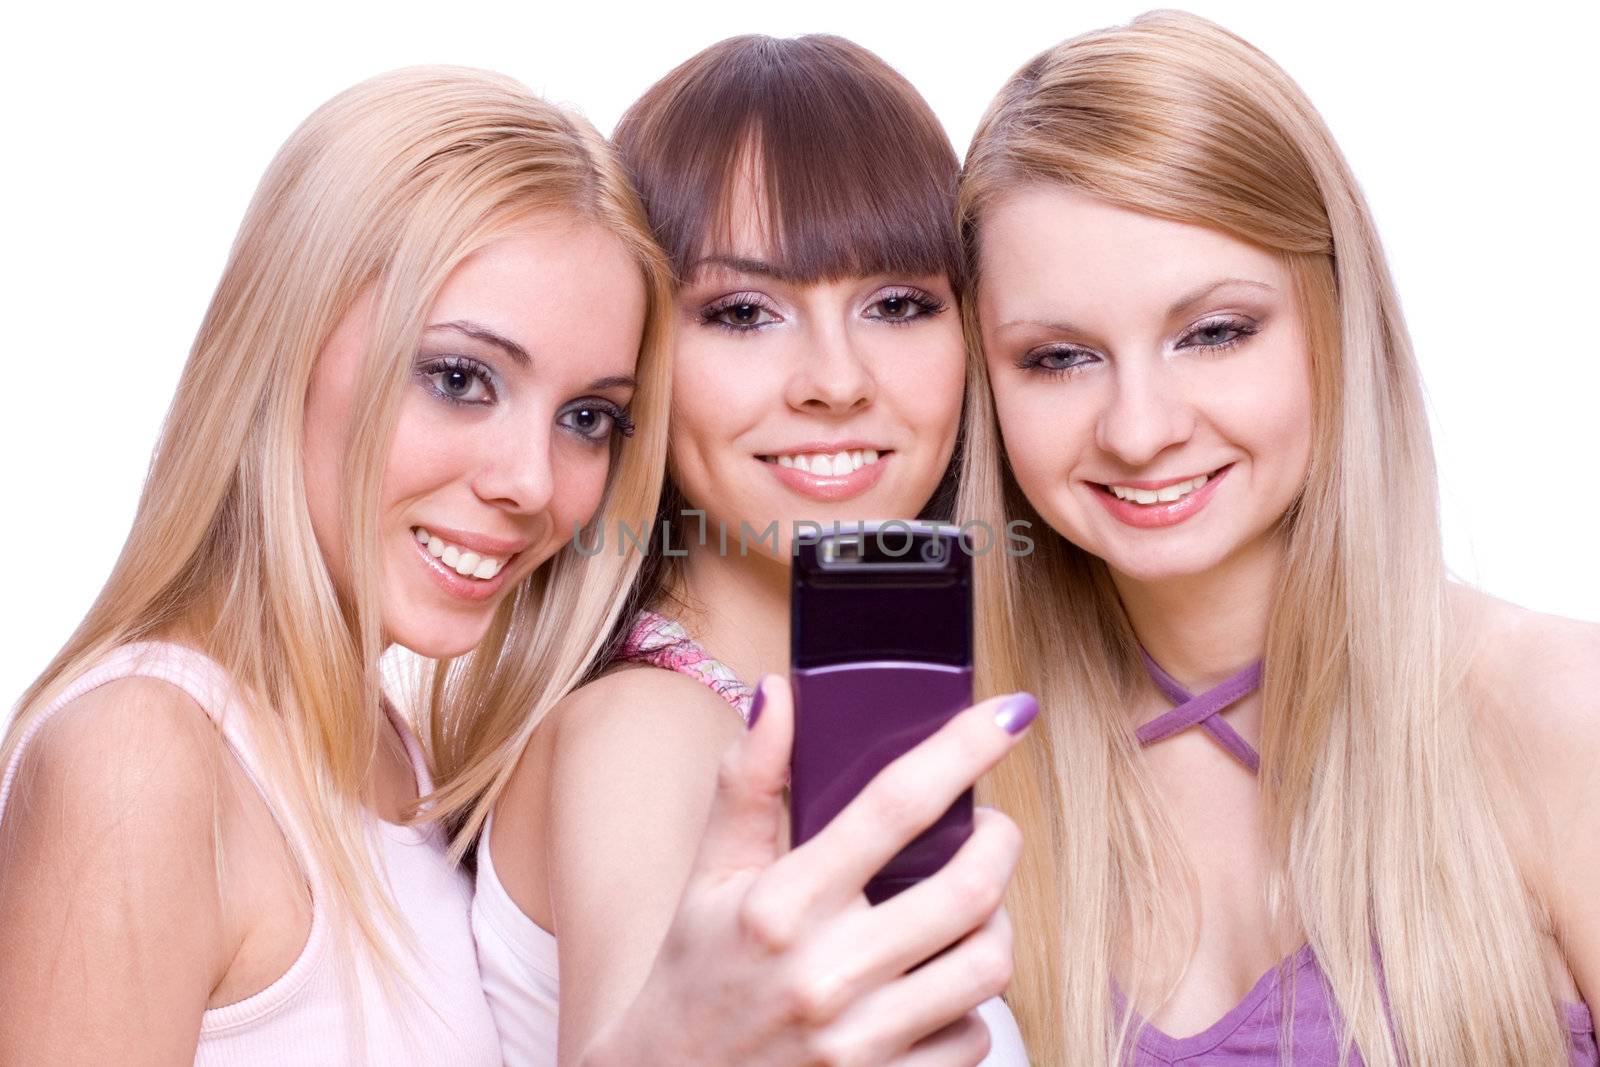 three girls with phone on a white background